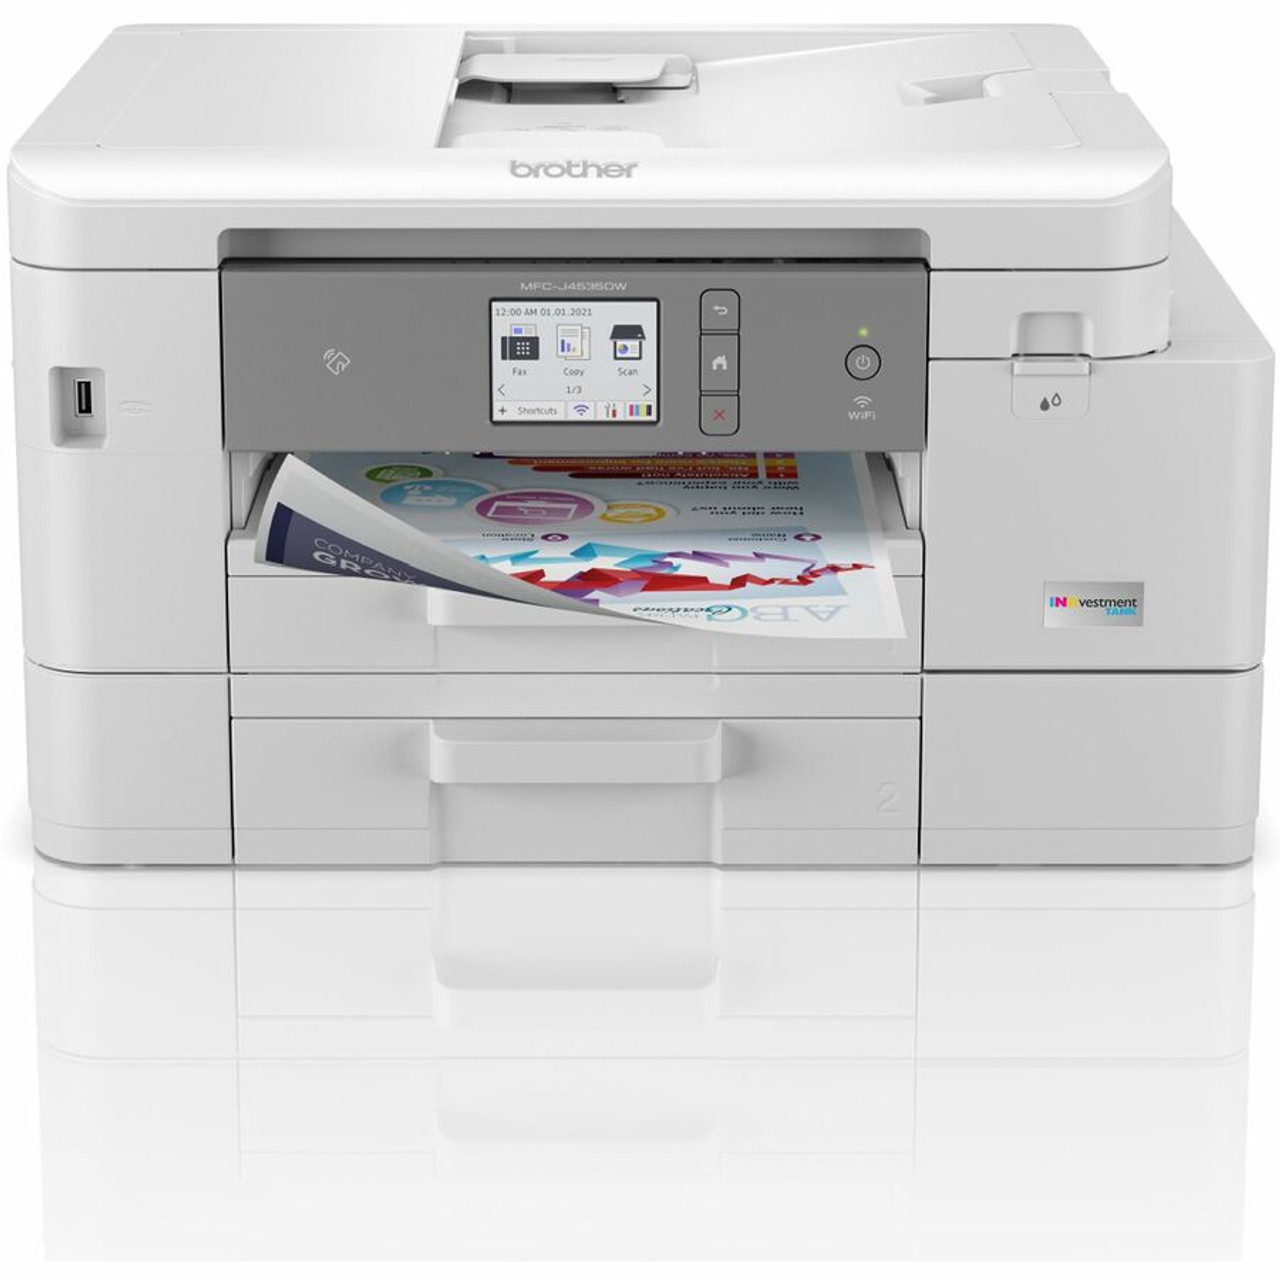 Brother INKvestment Tank MFC-J4535DW Inkjet Multifunction Printer-Color- Copier/Fax/Scanner-4800x1200 dpi Print-Automatic Duplex Print-30000 Pages-400 sheets Input-Color Flatbed Scanner-2400 dpi Optical Scan-Color Fax-Wireless AirPrint